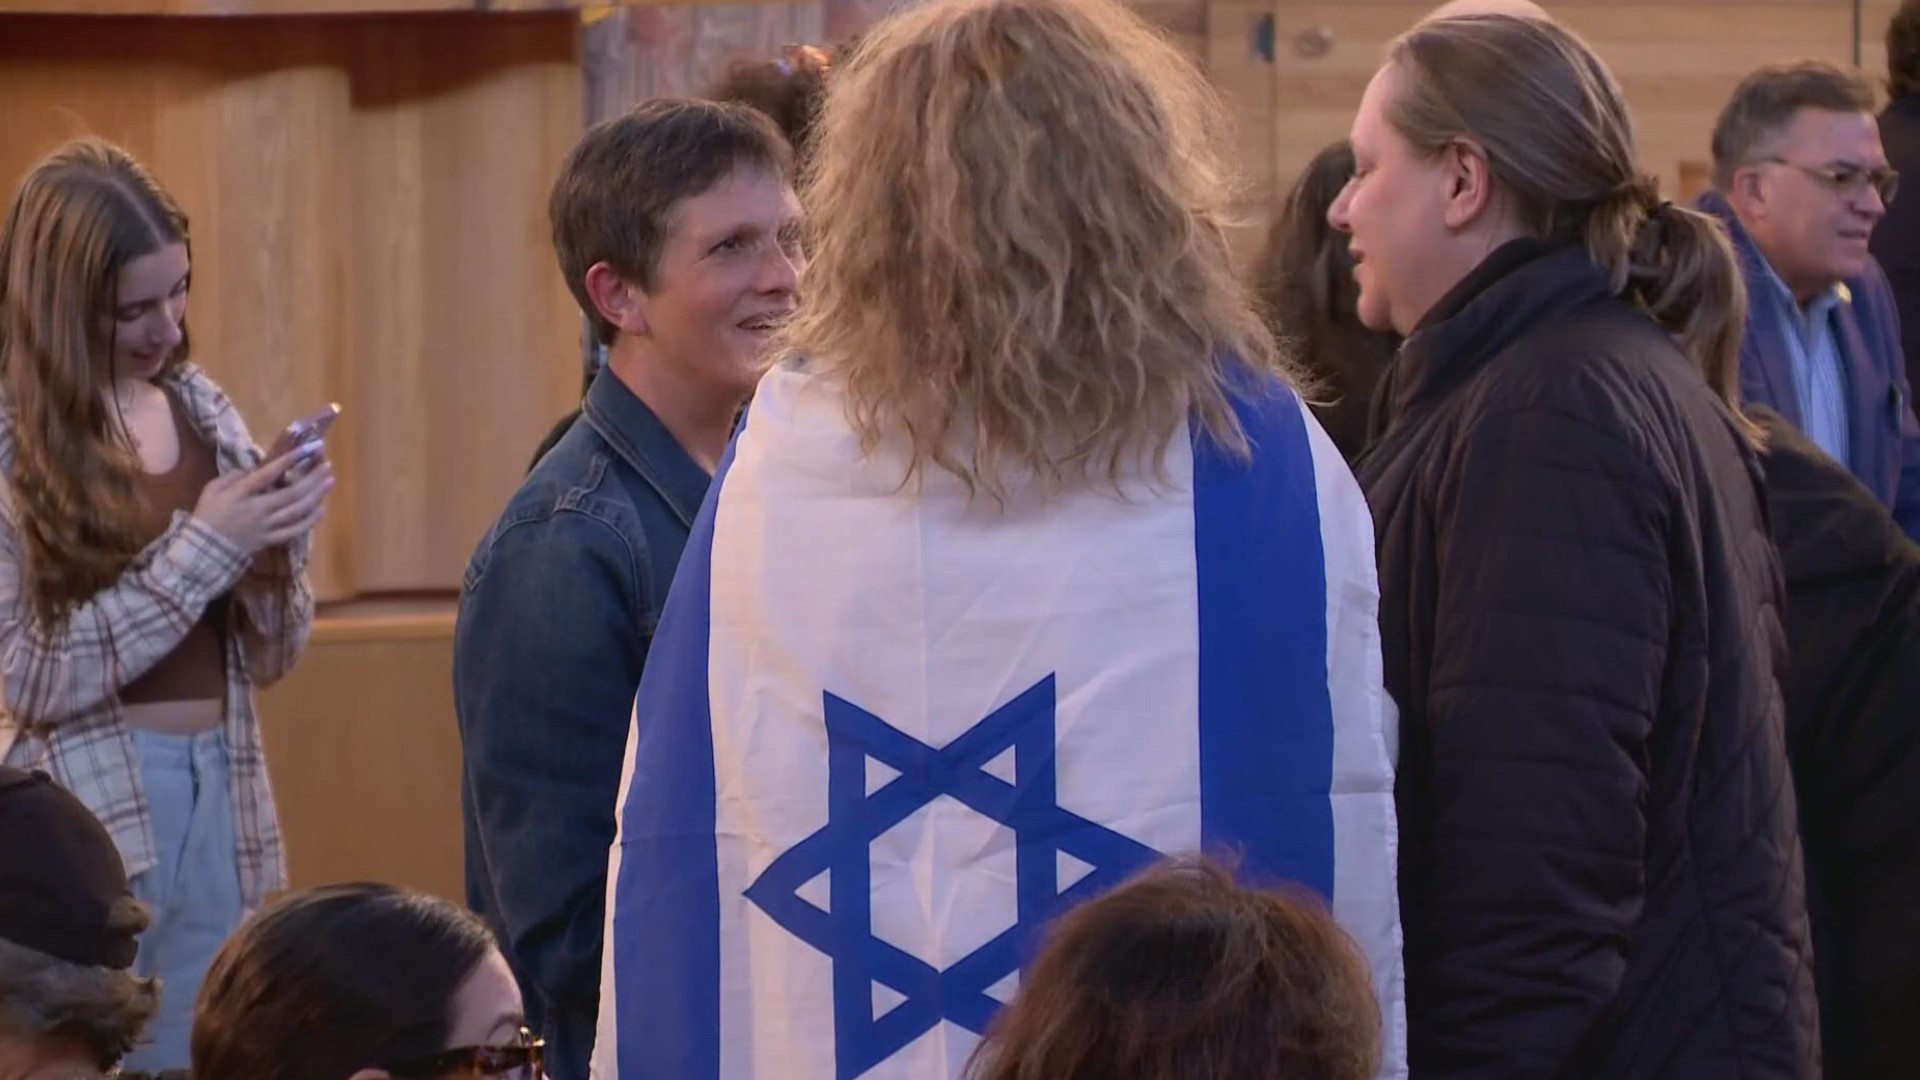 The gathering was put on by a number of local Jewish organizations including CRC, Minneapolis Jewish Federation, and St. Paul Jewish Federation, among others.